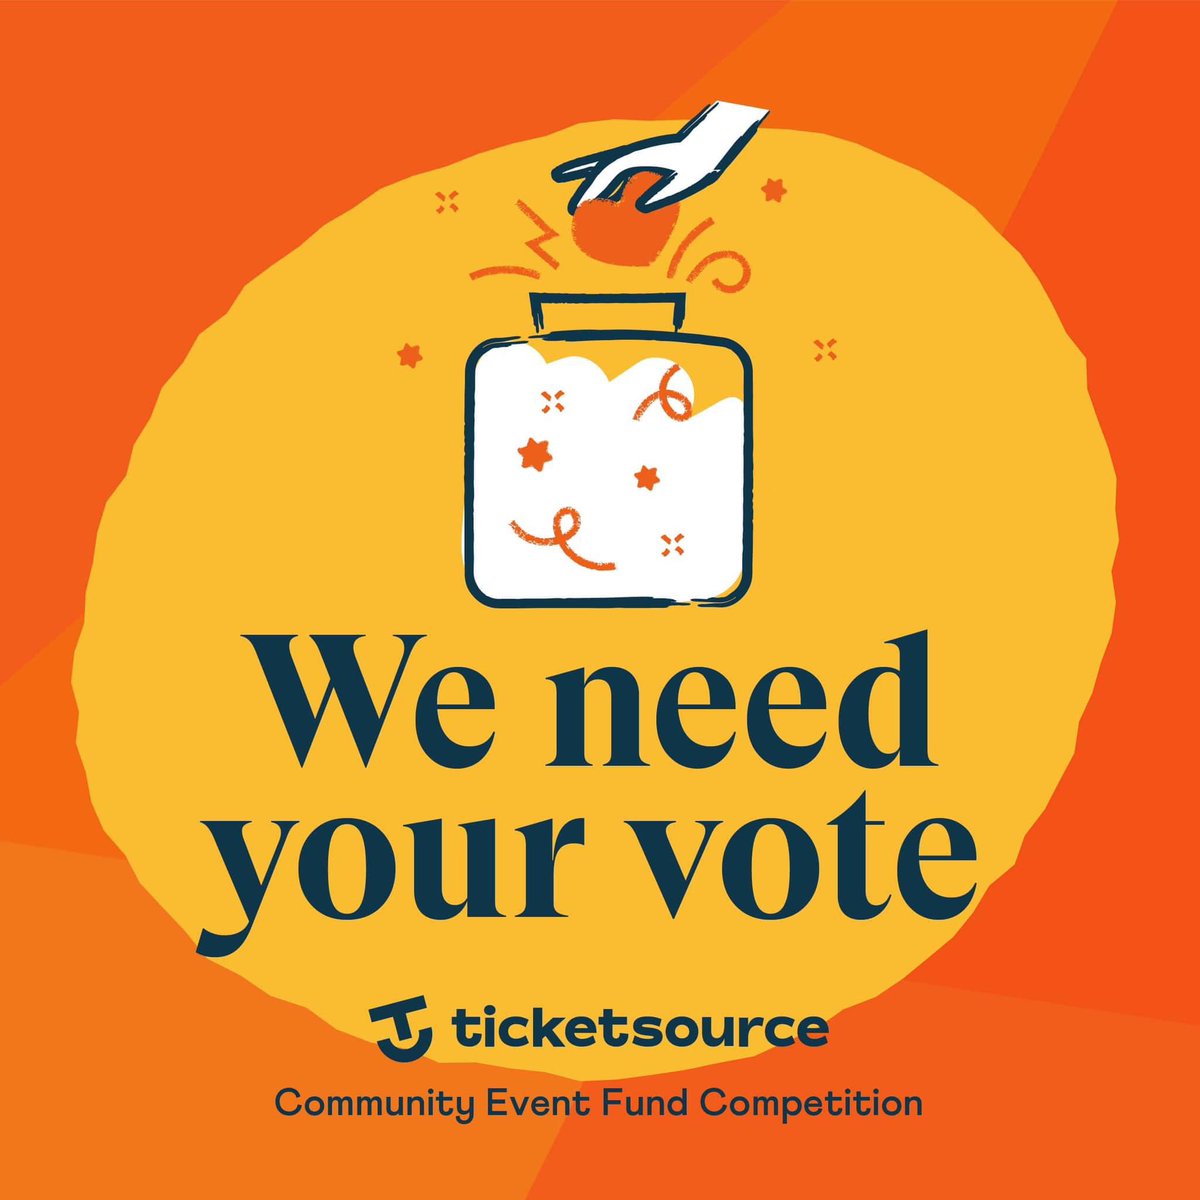 There’s still time to vote for us in the @TicketSource Community Event Fund Competition & help us bring wonderful authors to our island for #IBF24. Many thanks to those of you who’ve already voted & shared 🙏ticketsource.wishpondpages.com/ticketsource-c… #ticketsourcefund